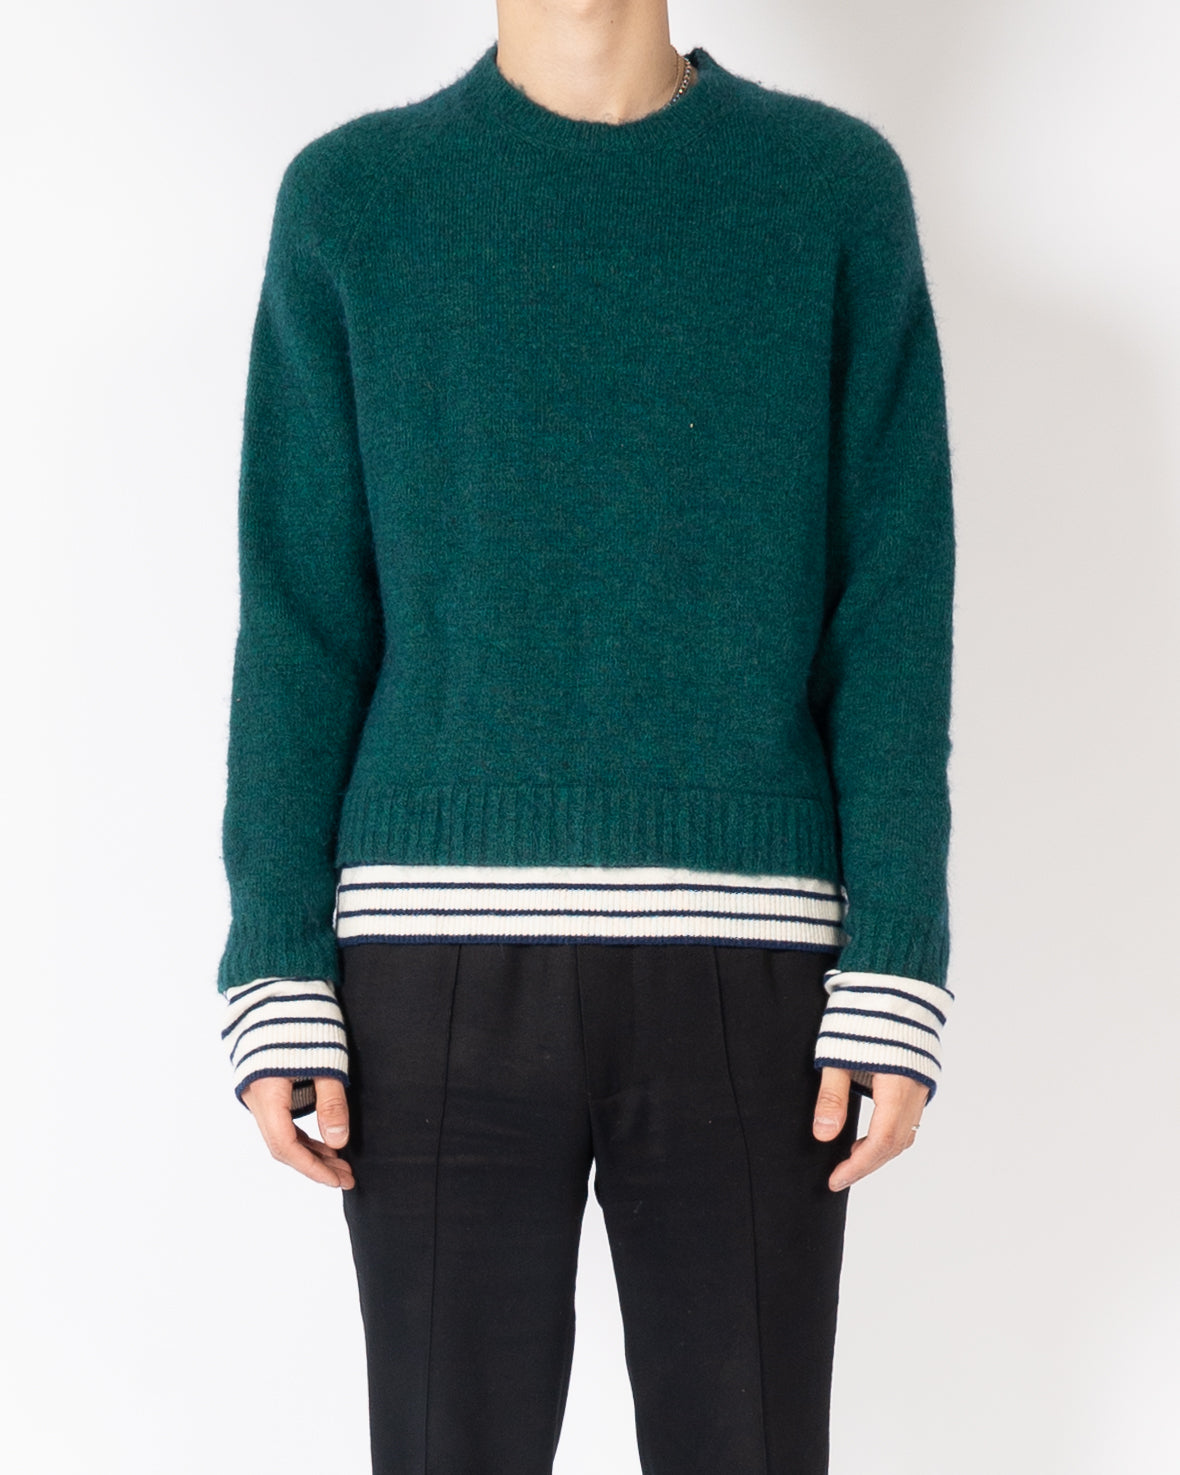 FW18 Turquoise Knit with Striped Contrast Detailing